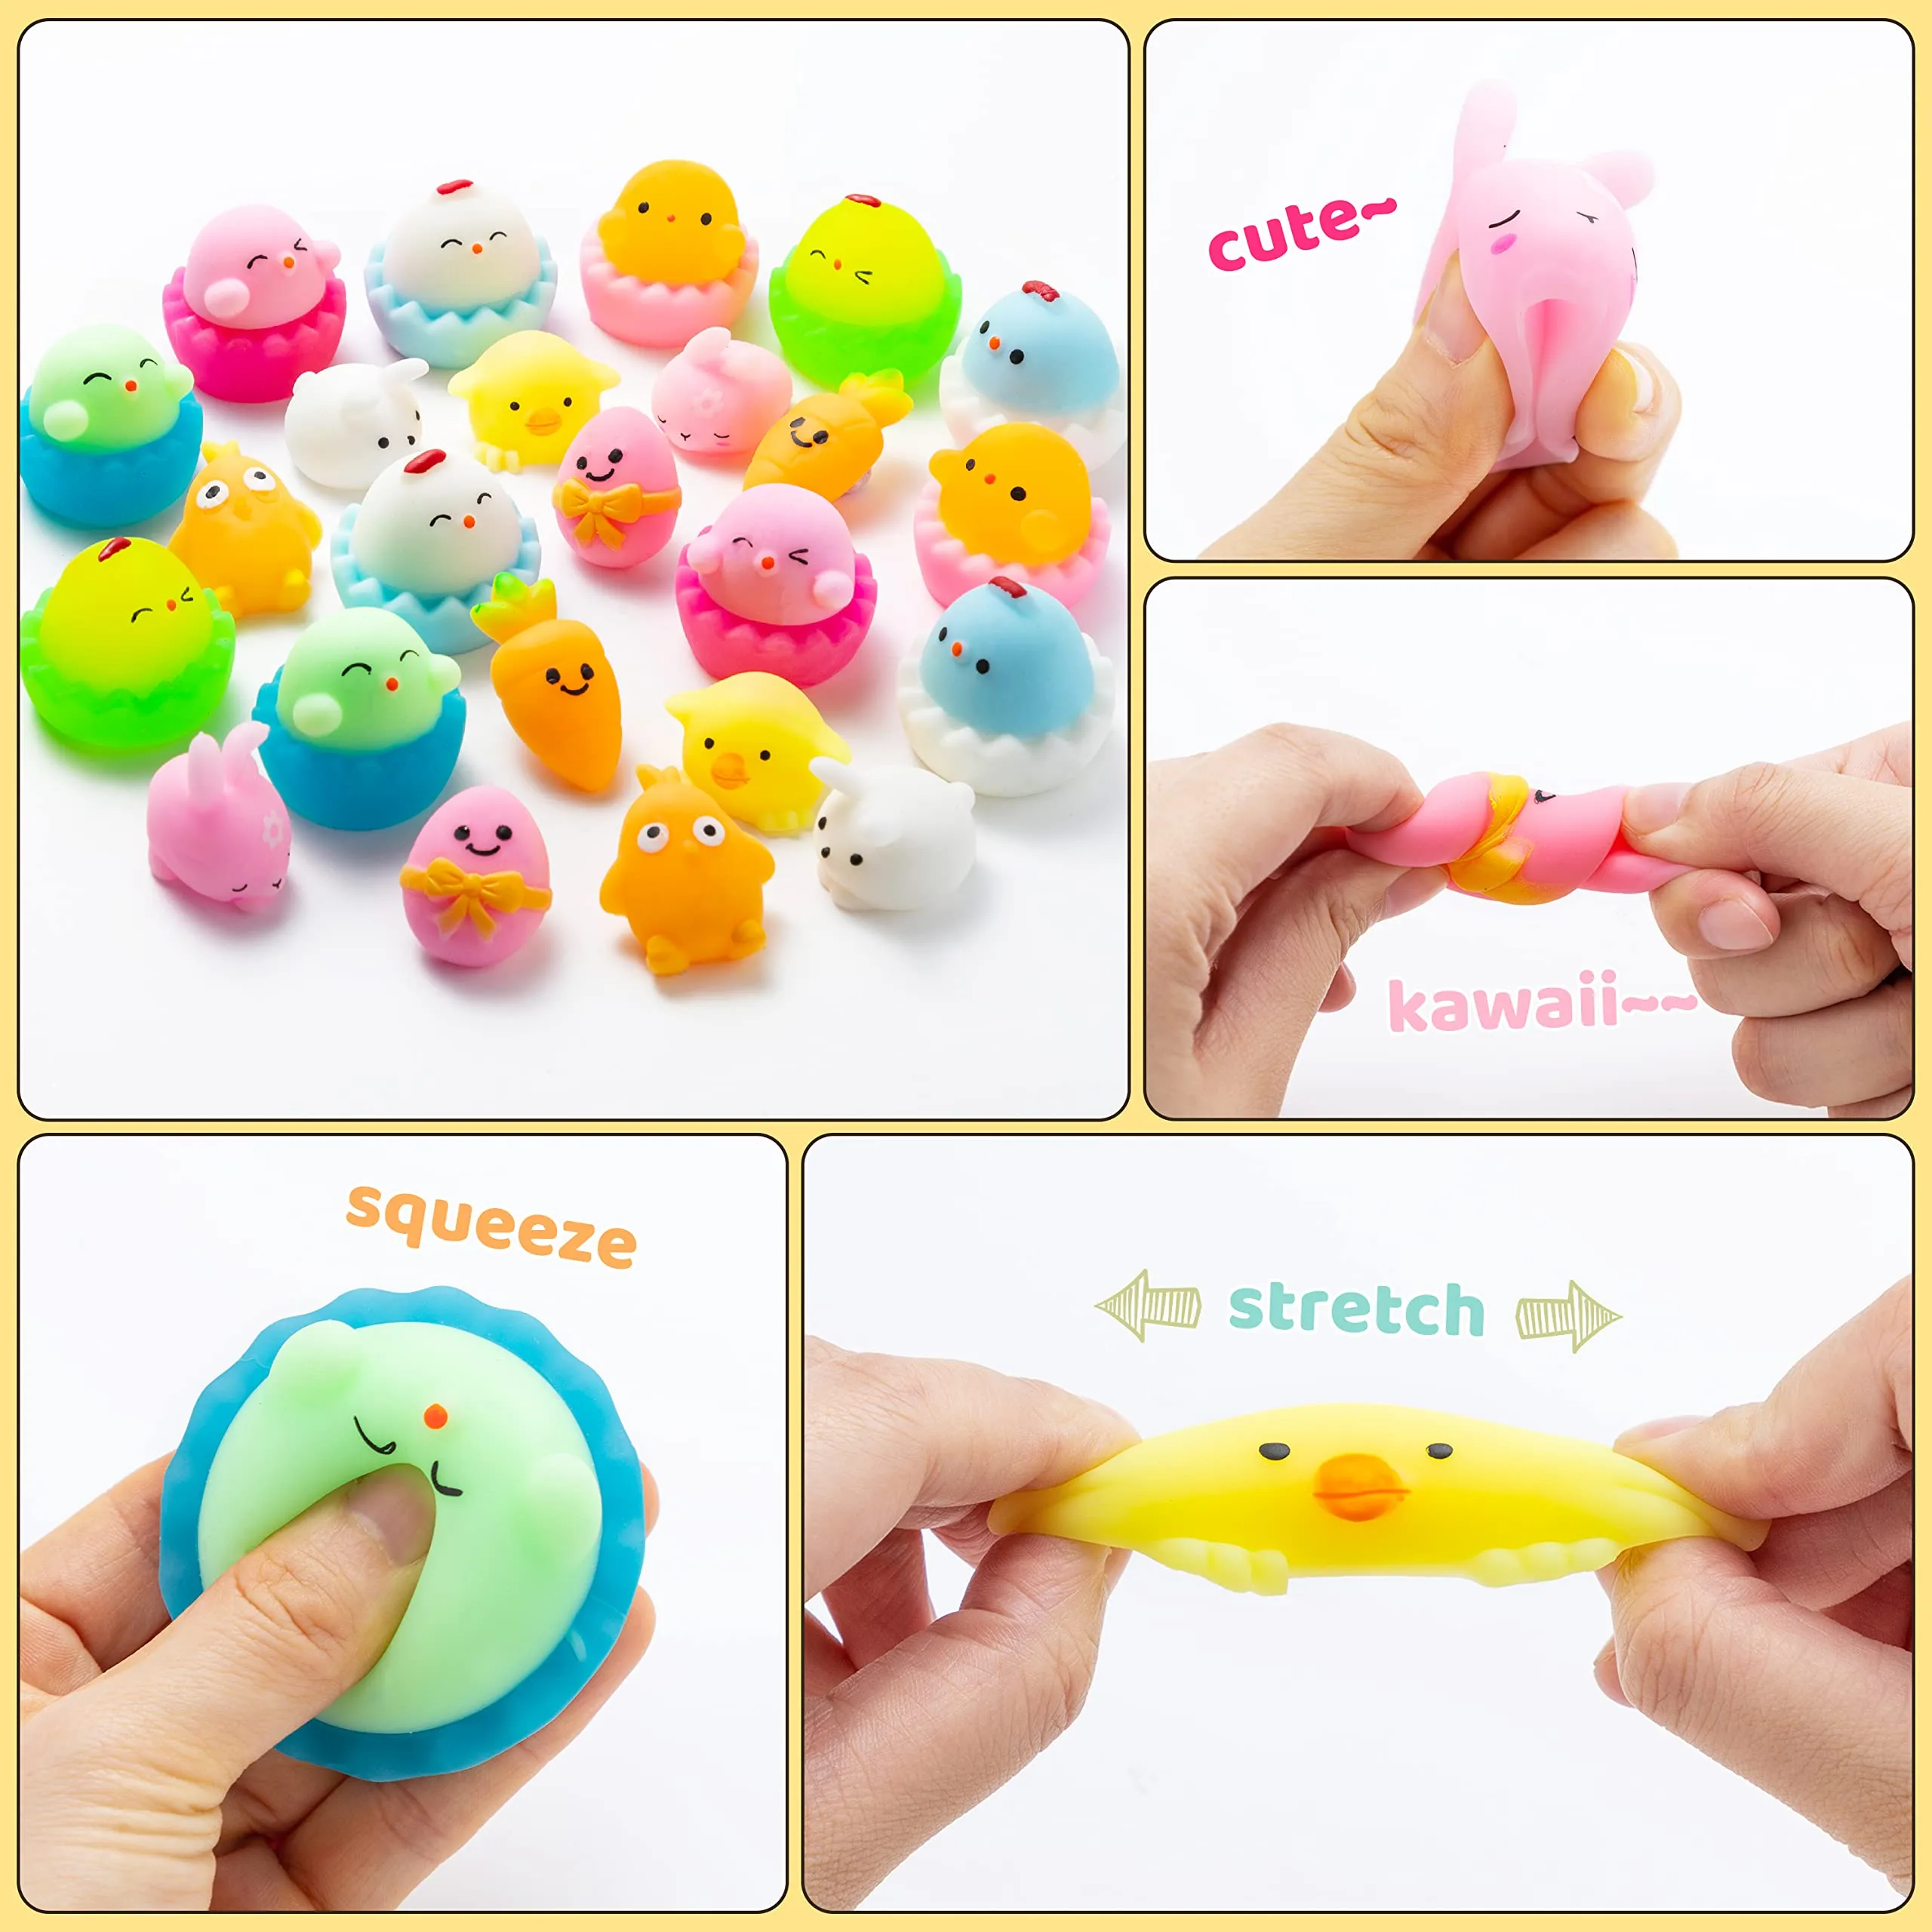 Squishies Squish Toys 24 Pieces Kids Party Favors Mochi Squishy